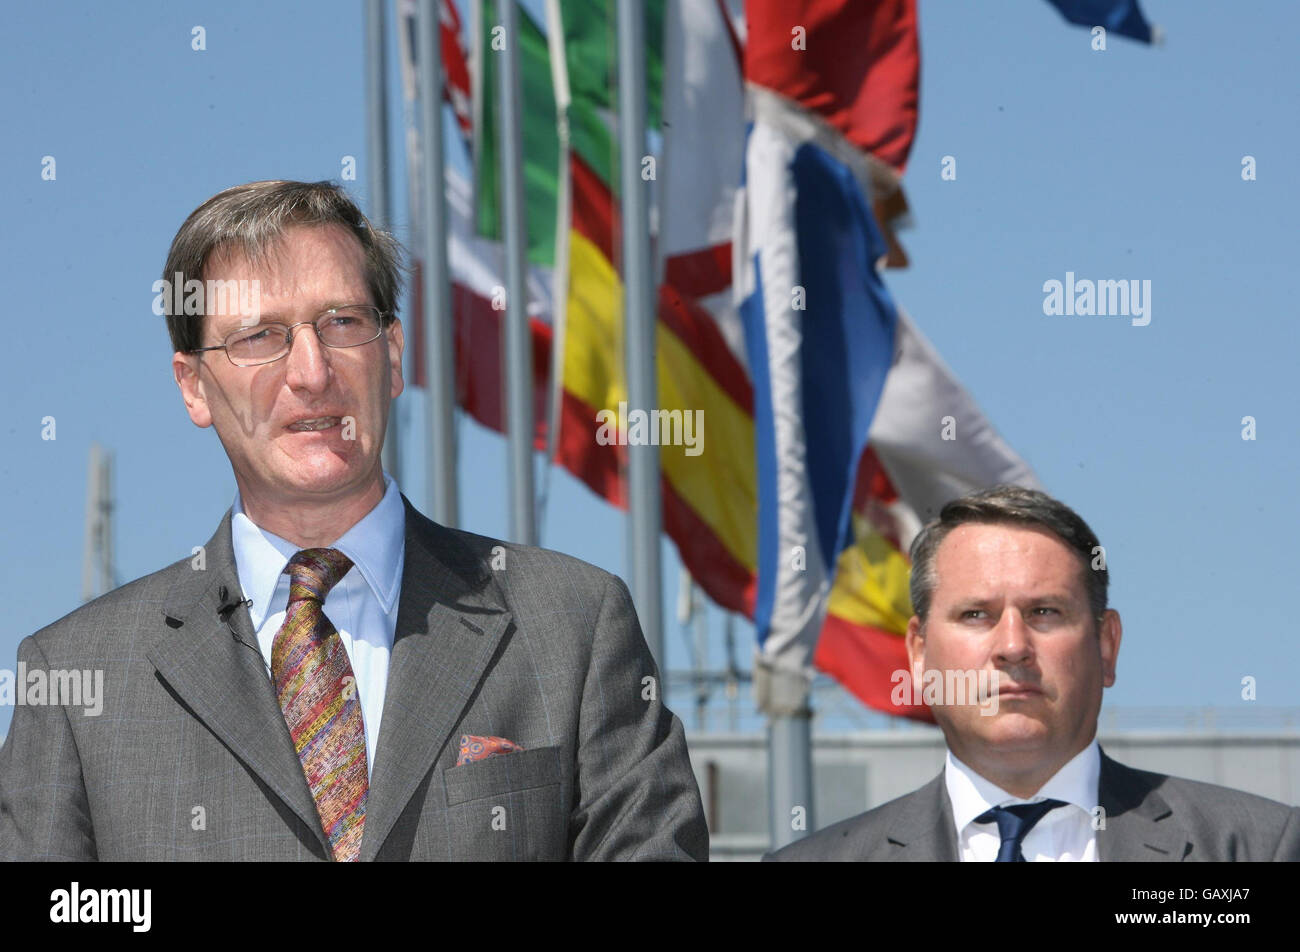 Conservative Party Shadow Home secretary Dominic Grieve speaks to the press during the launch of Lord Stevens' report 'Border Protection Service for the UK: Policy Proposals' at London City Airport in east London, as Colonel Richard Kemp (right) looks on. Stock Photo